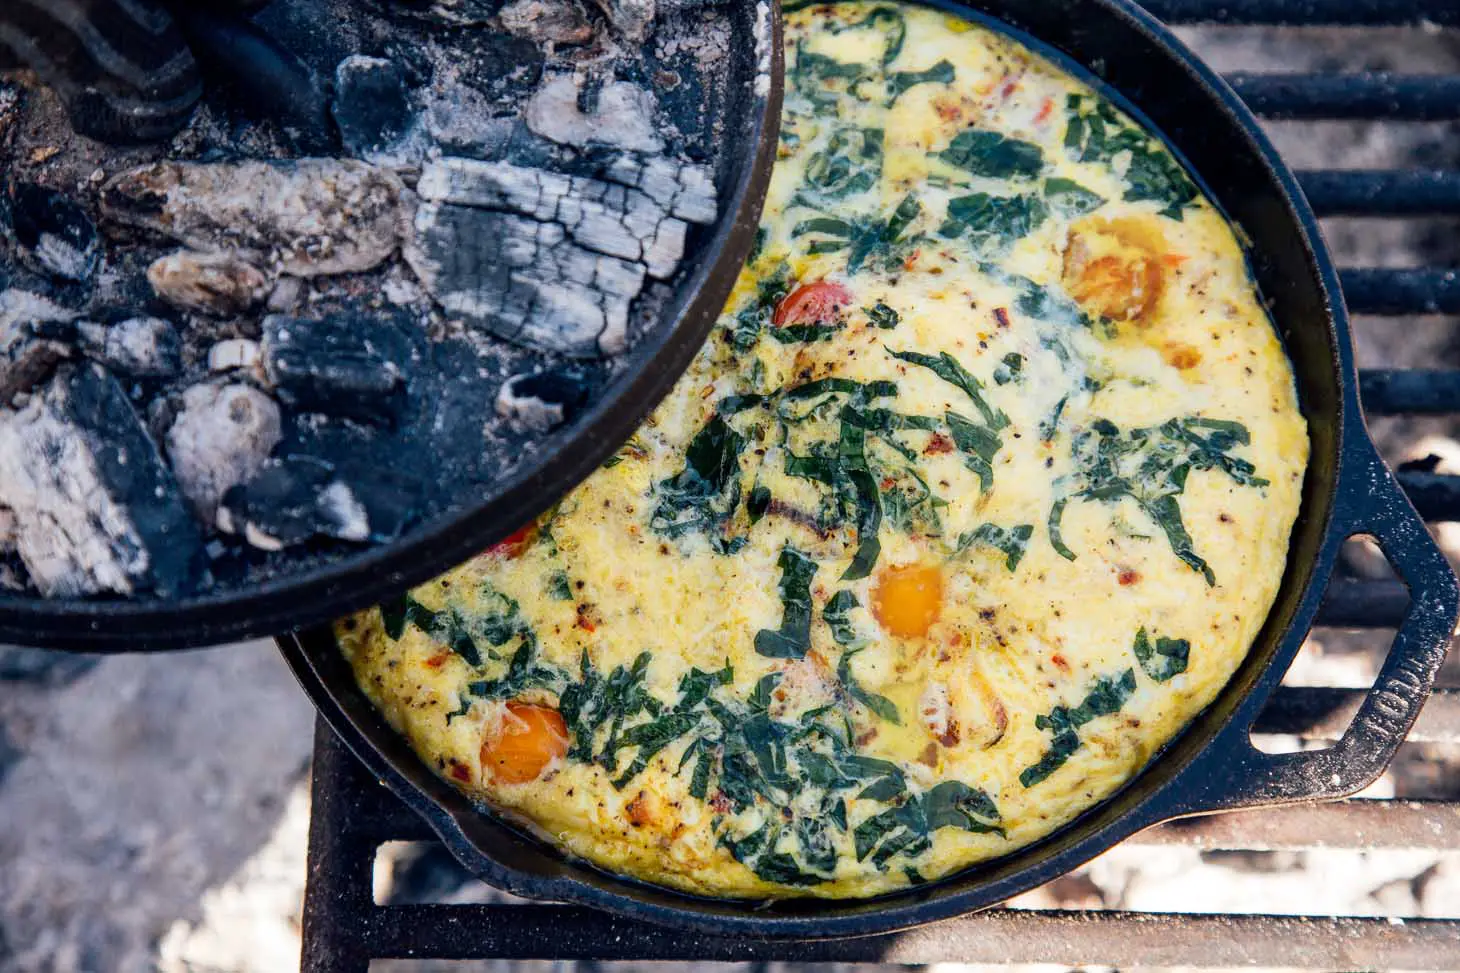 Lid to a cast iron skillet being removed to reveal a vegetable frittata.